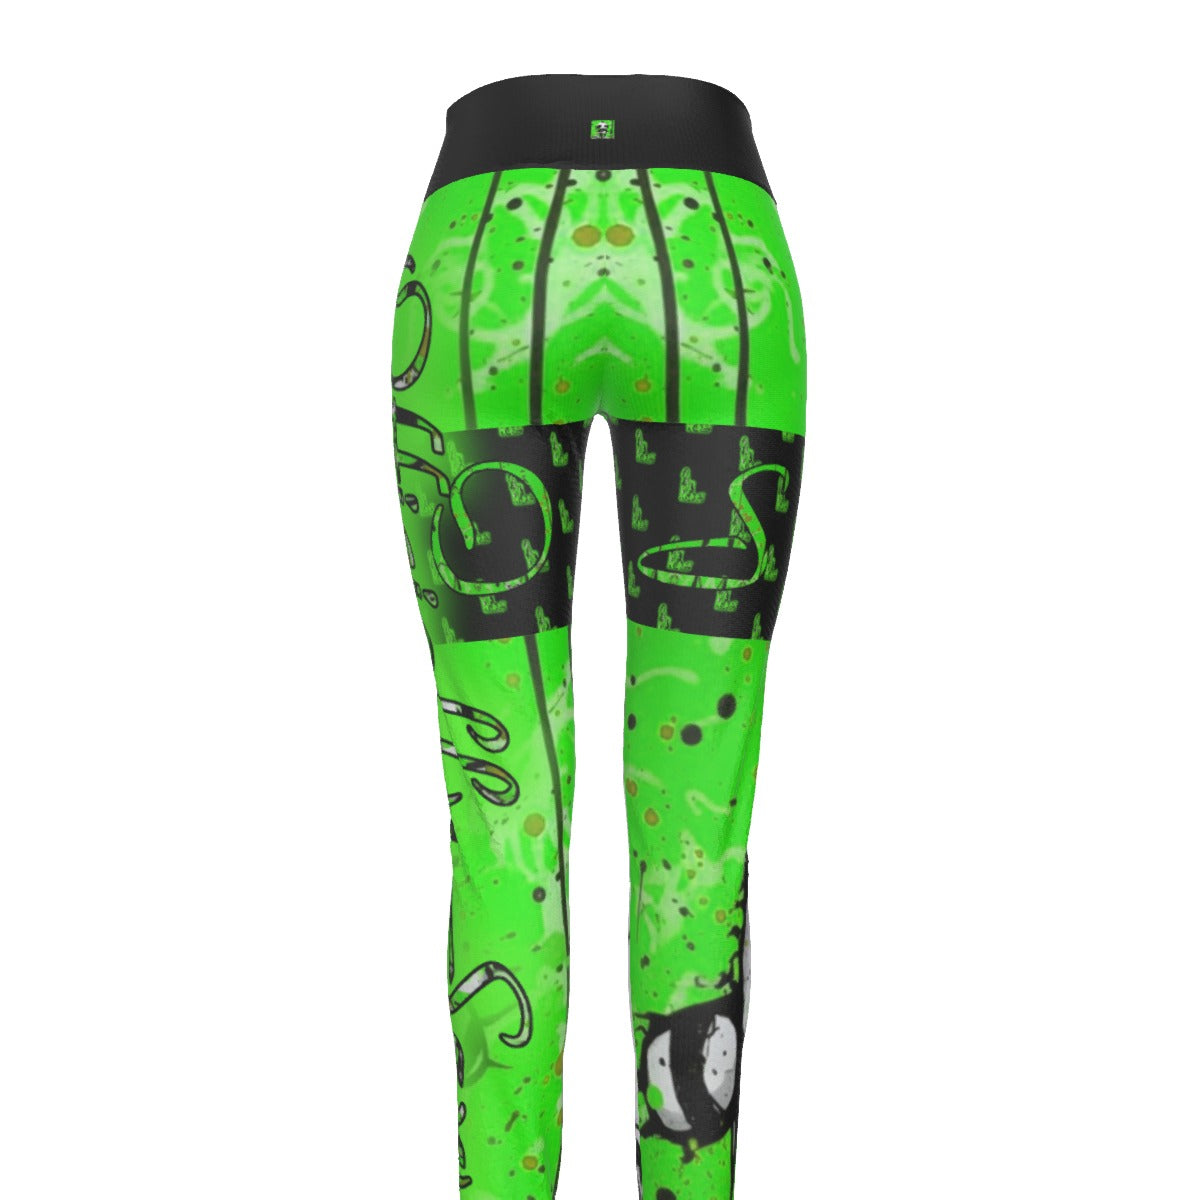 Officially Sexy Creepy Boy Officially Sexy Neon Green Women's High Waist Thigh High Booty Popper Leggings #2 With OS On Front And Back Thighs (English) 3